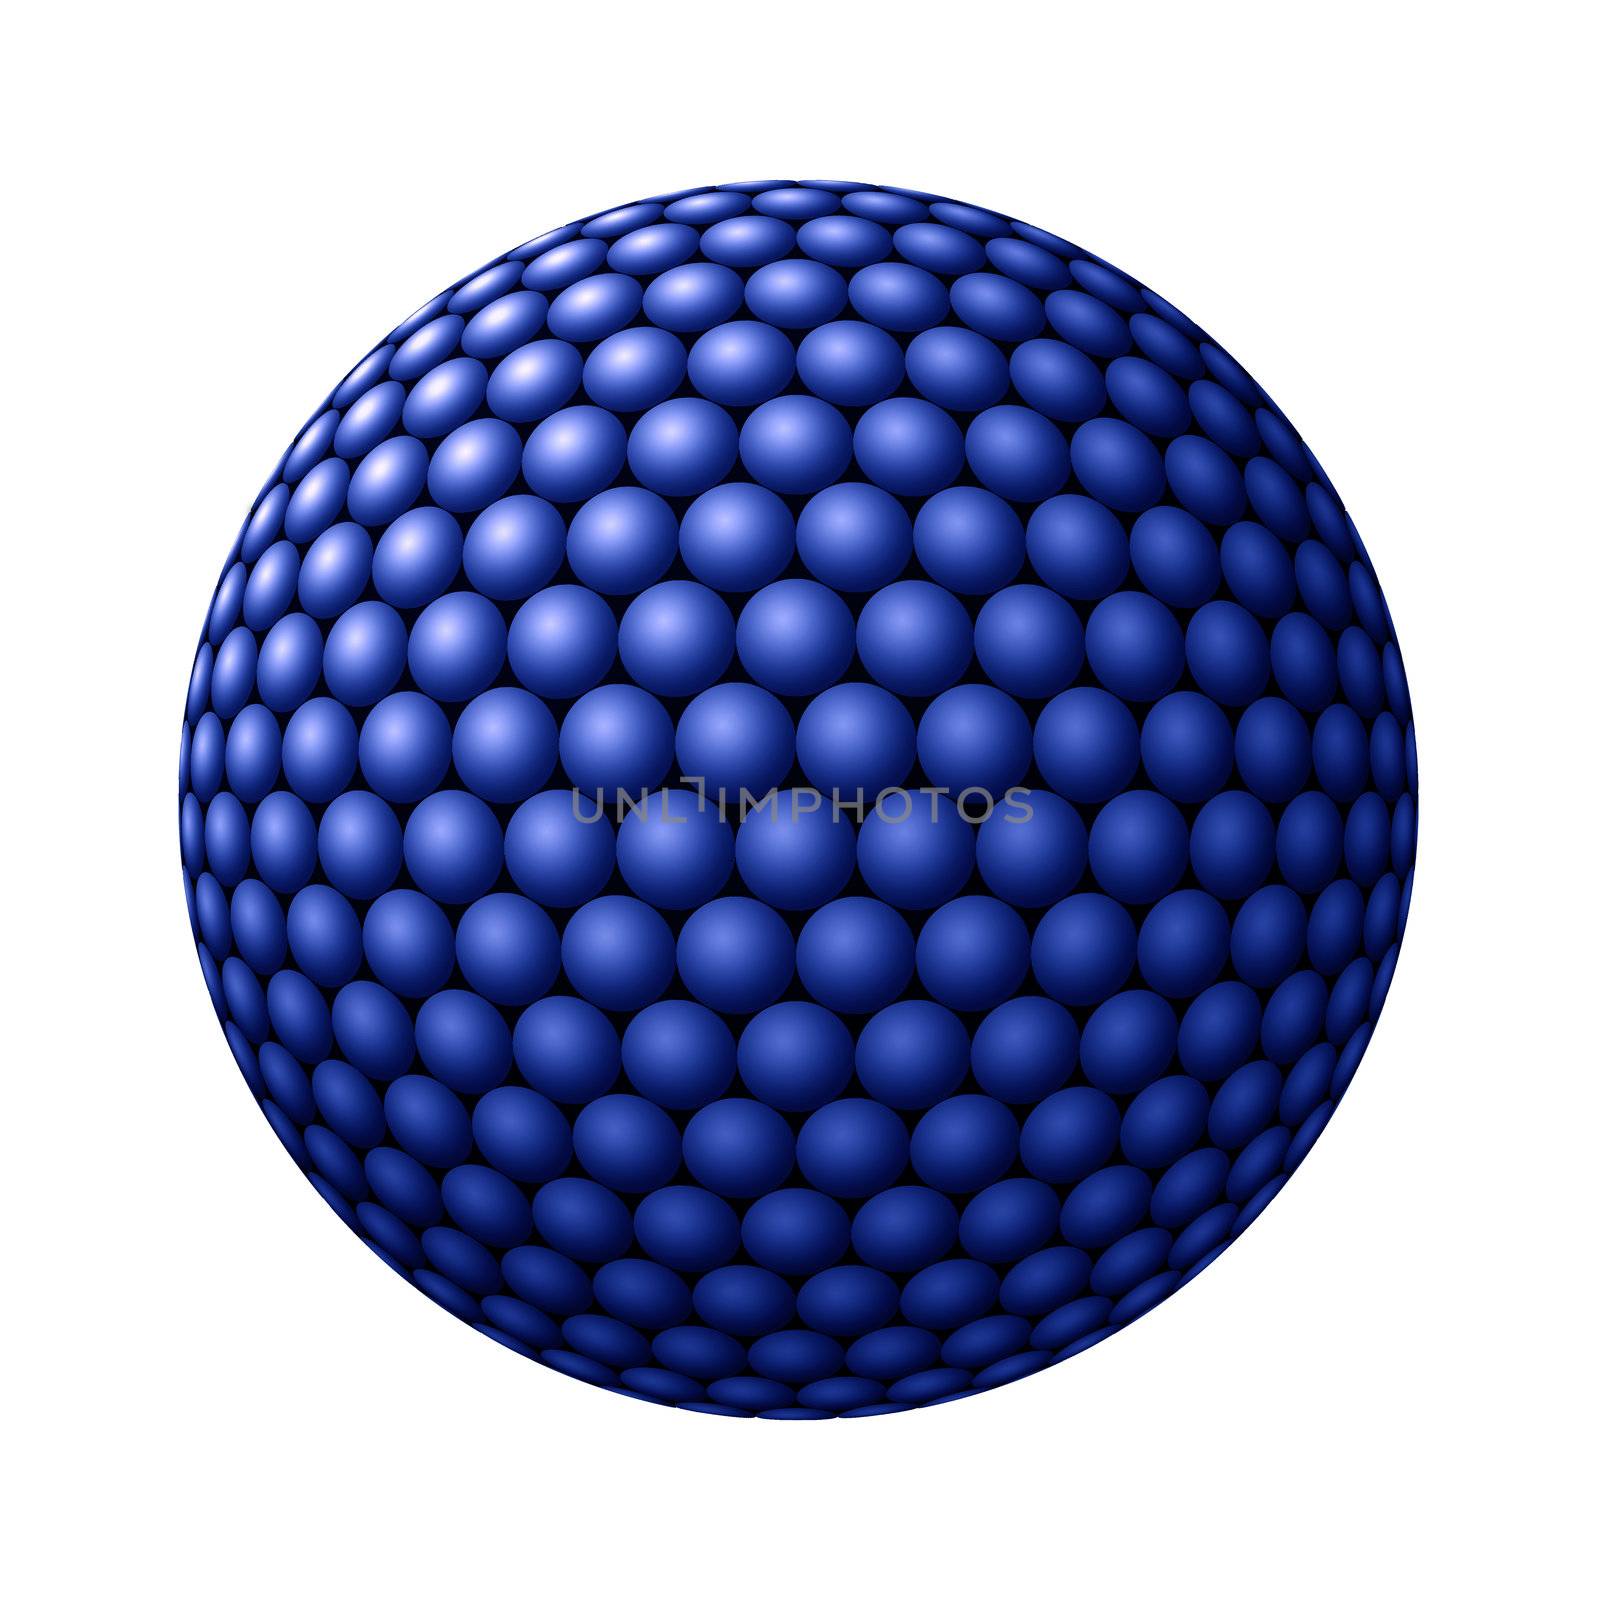 Blue spheres clustered into a larger sphere against white background